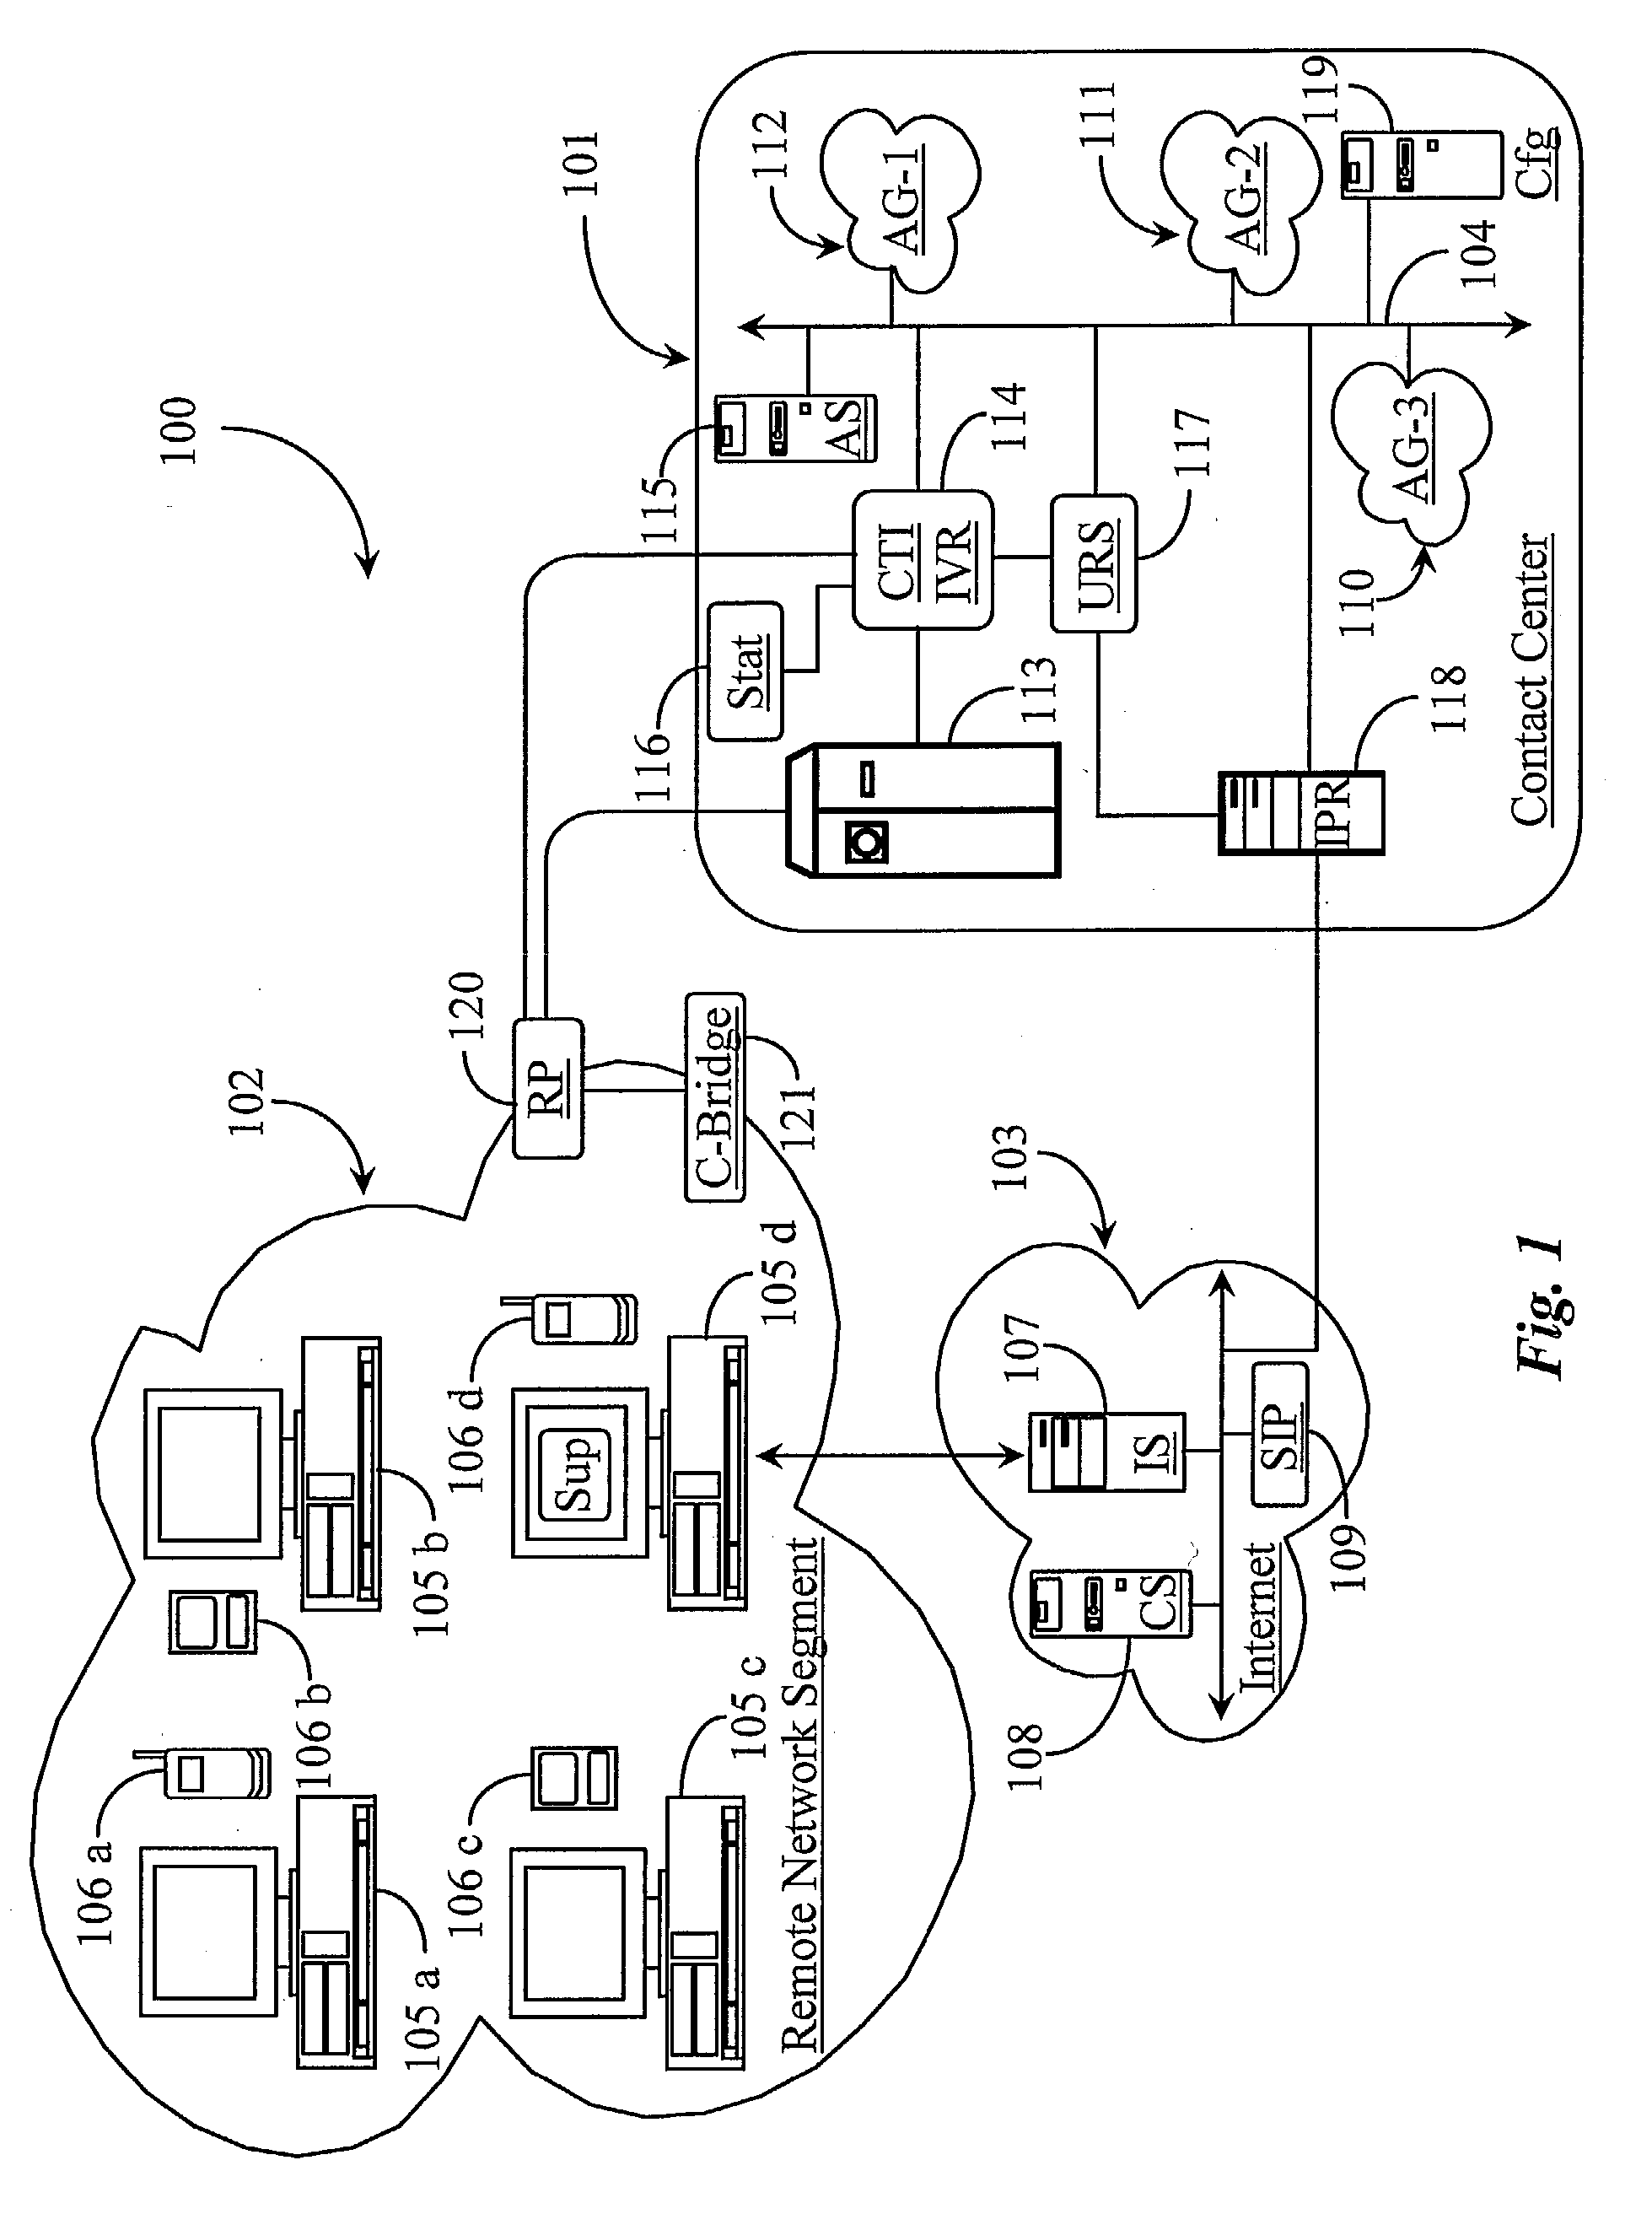 System for Facilitating Loosely Configured Service Worker Groups in a Dynamic Call Center Environment